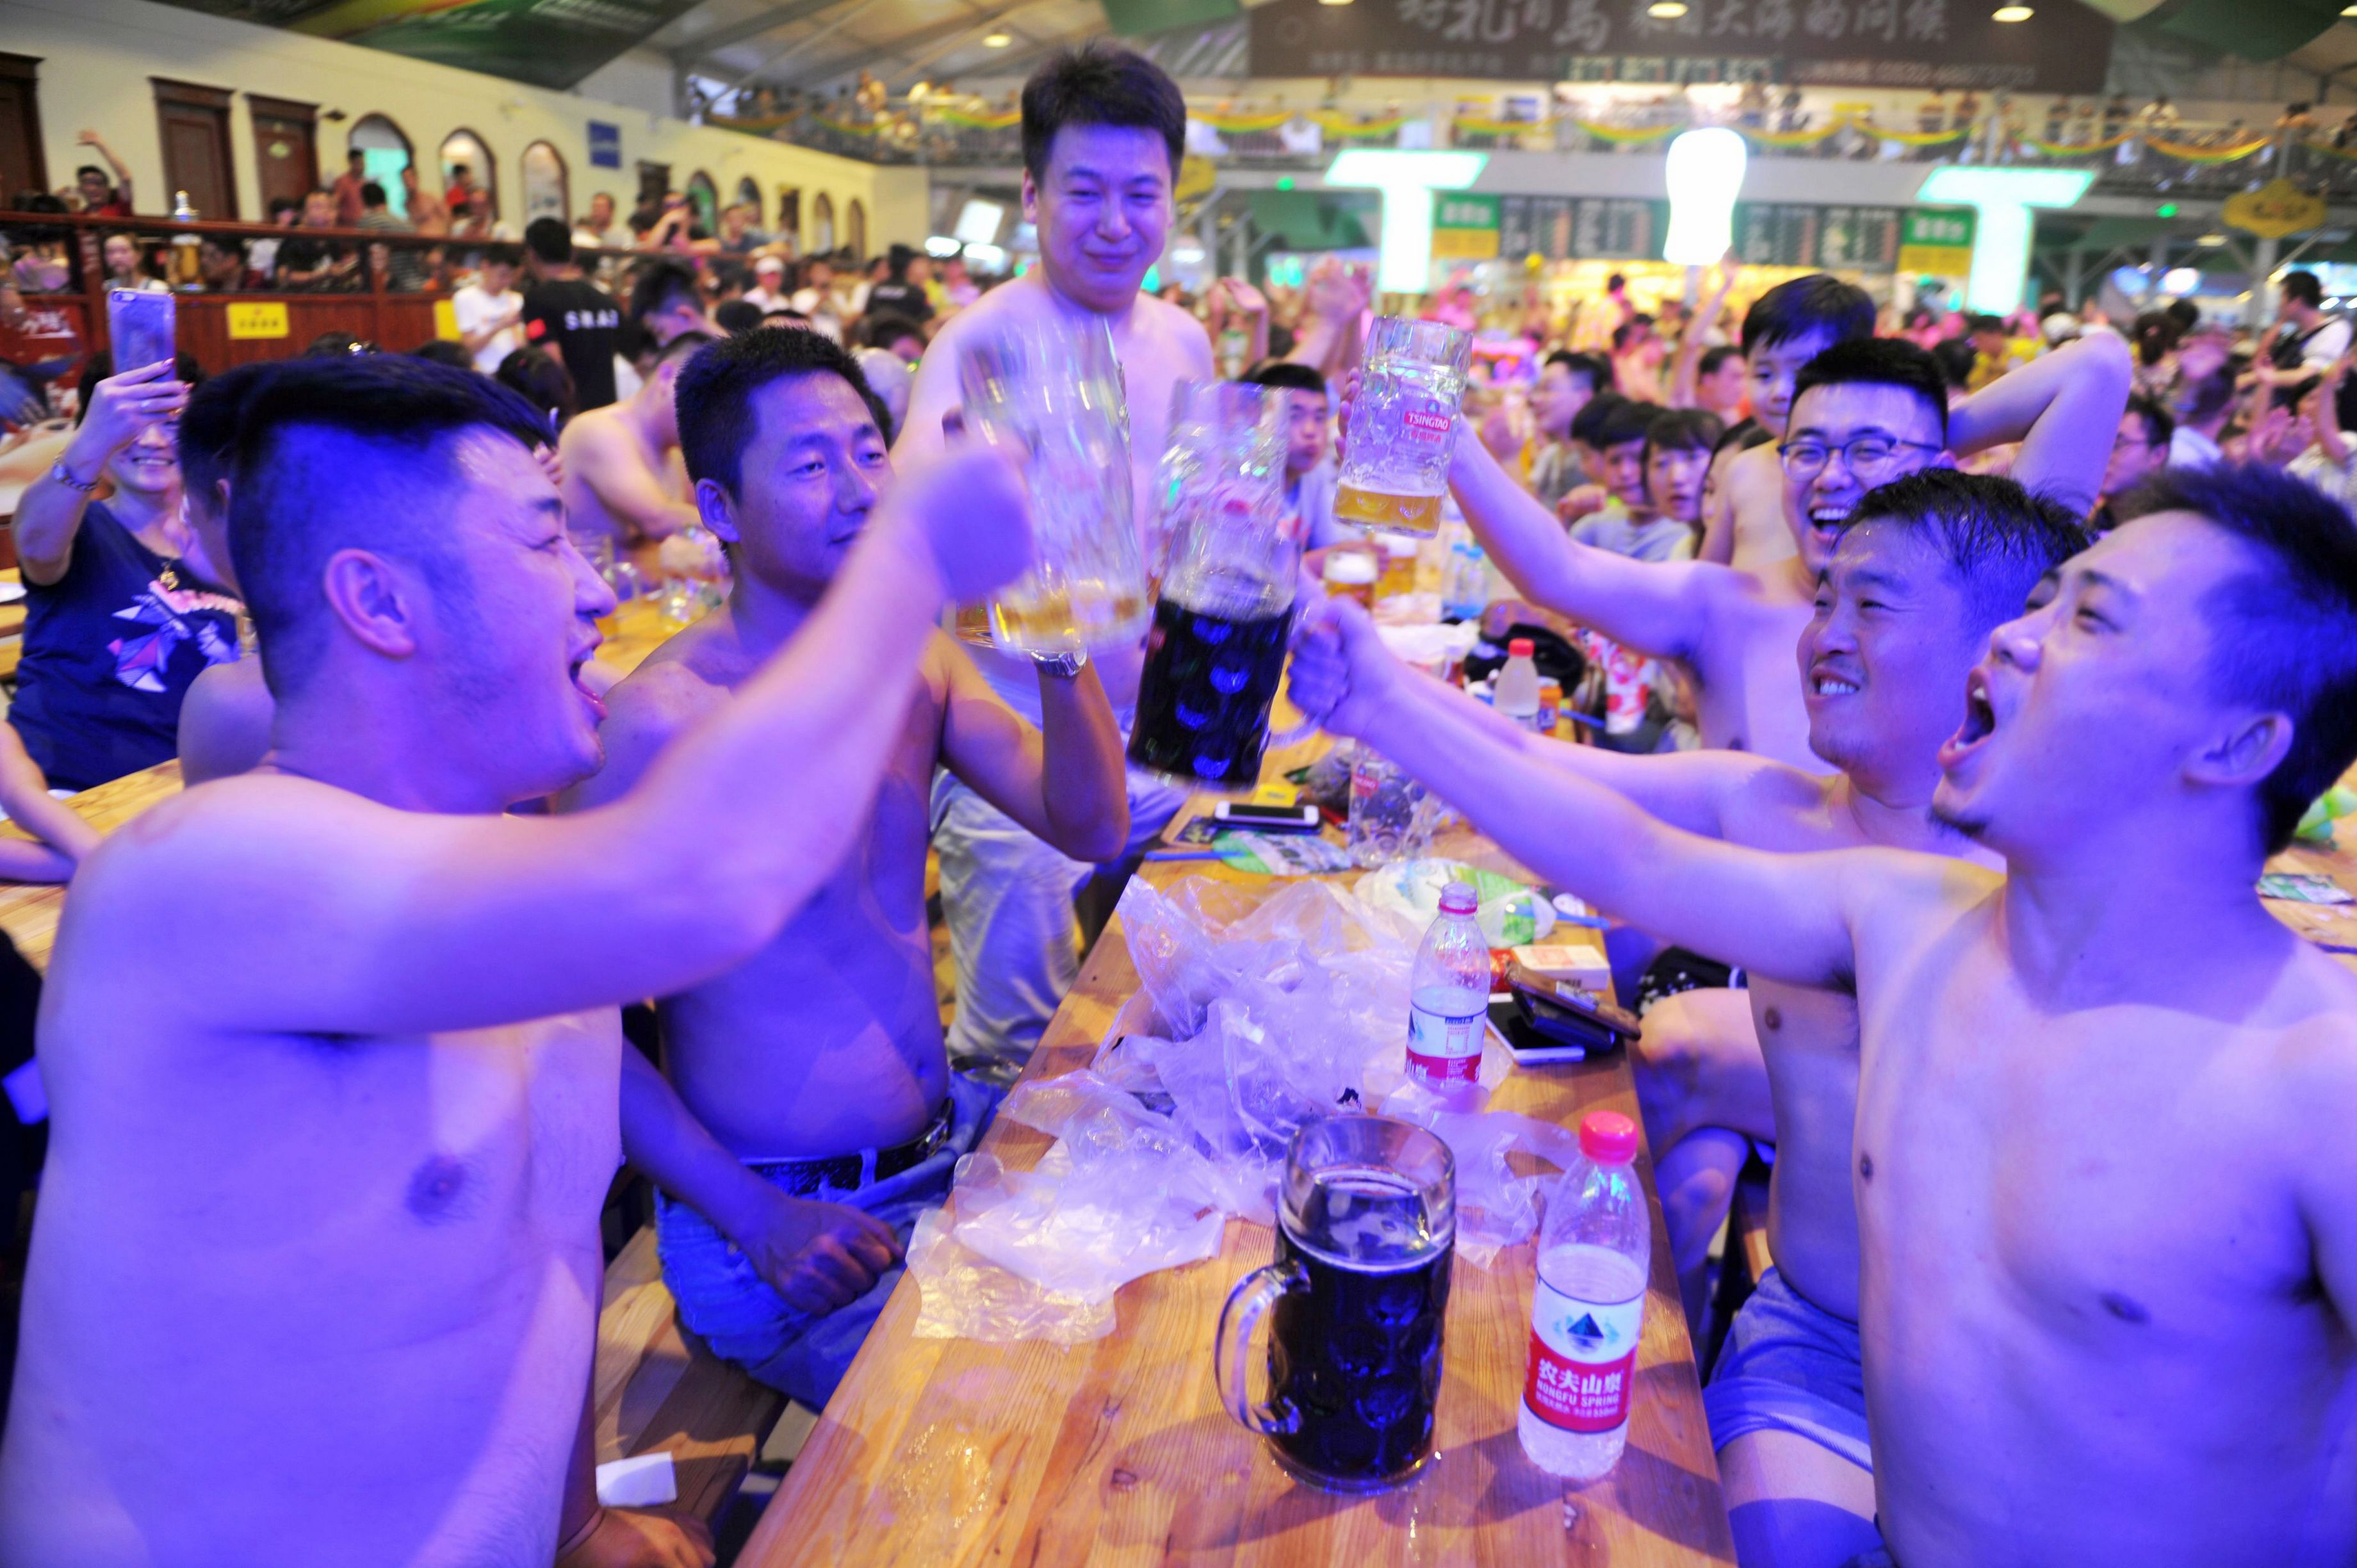 This photo taken on Aug. 7, 2017 shows people toasting at the annual Qingdao Beer Festival in China's eastern Shandong province. (AFP Contributor—AFP/Getty Images)